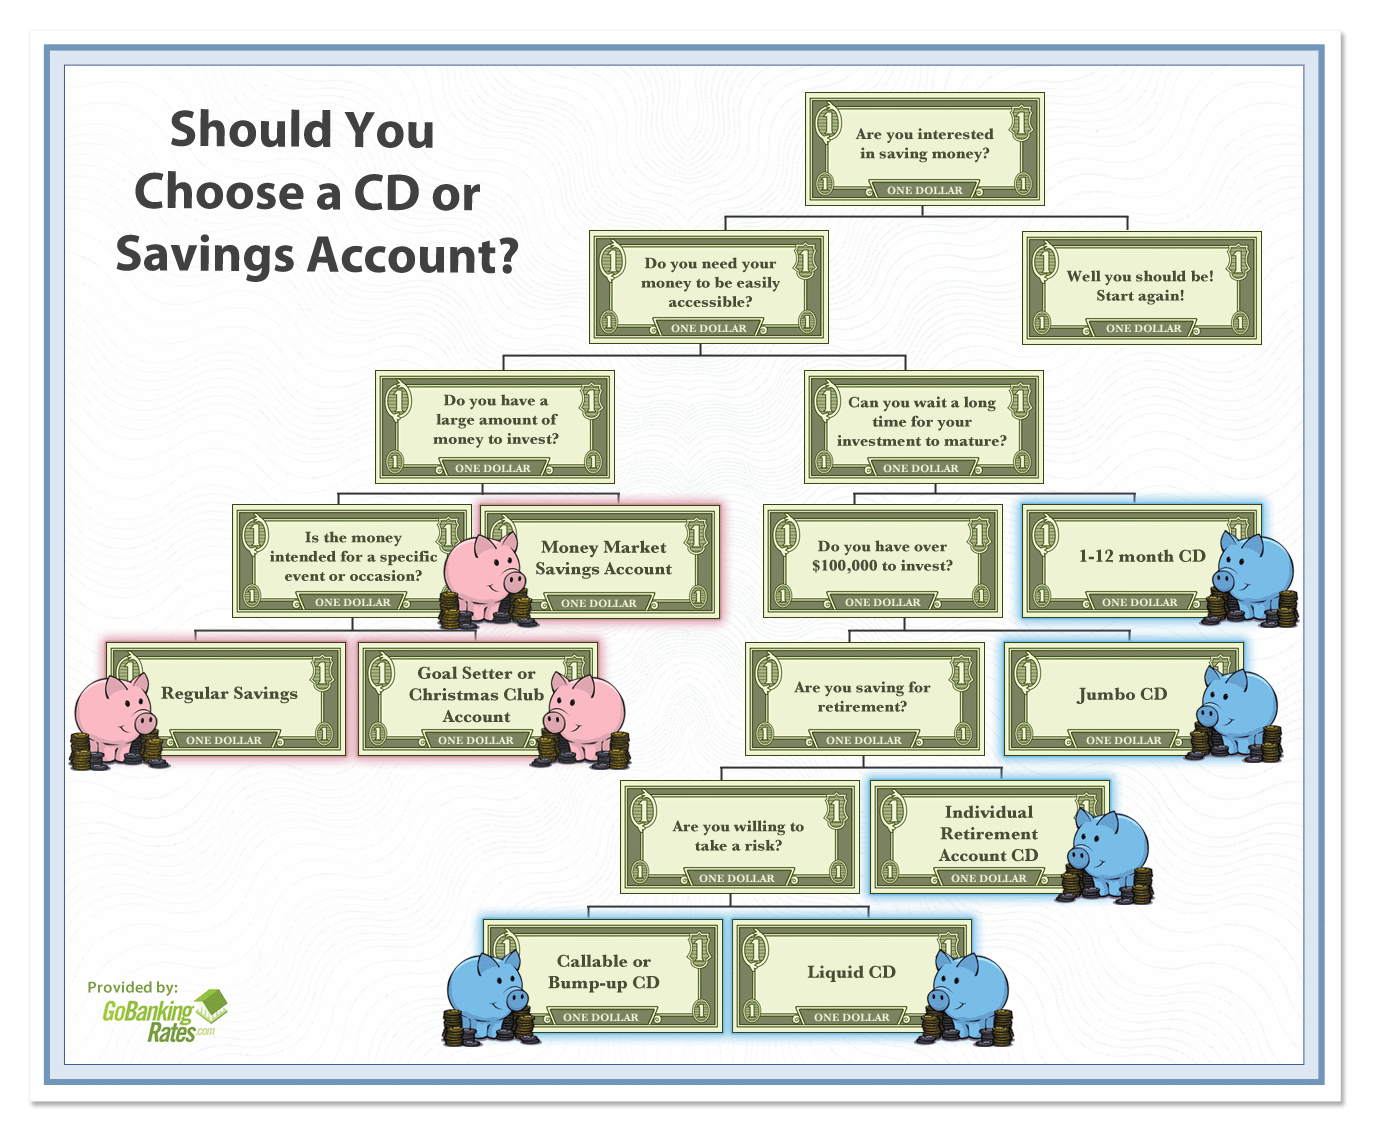 Should You Choose a CD or Savings Account?  Infographic